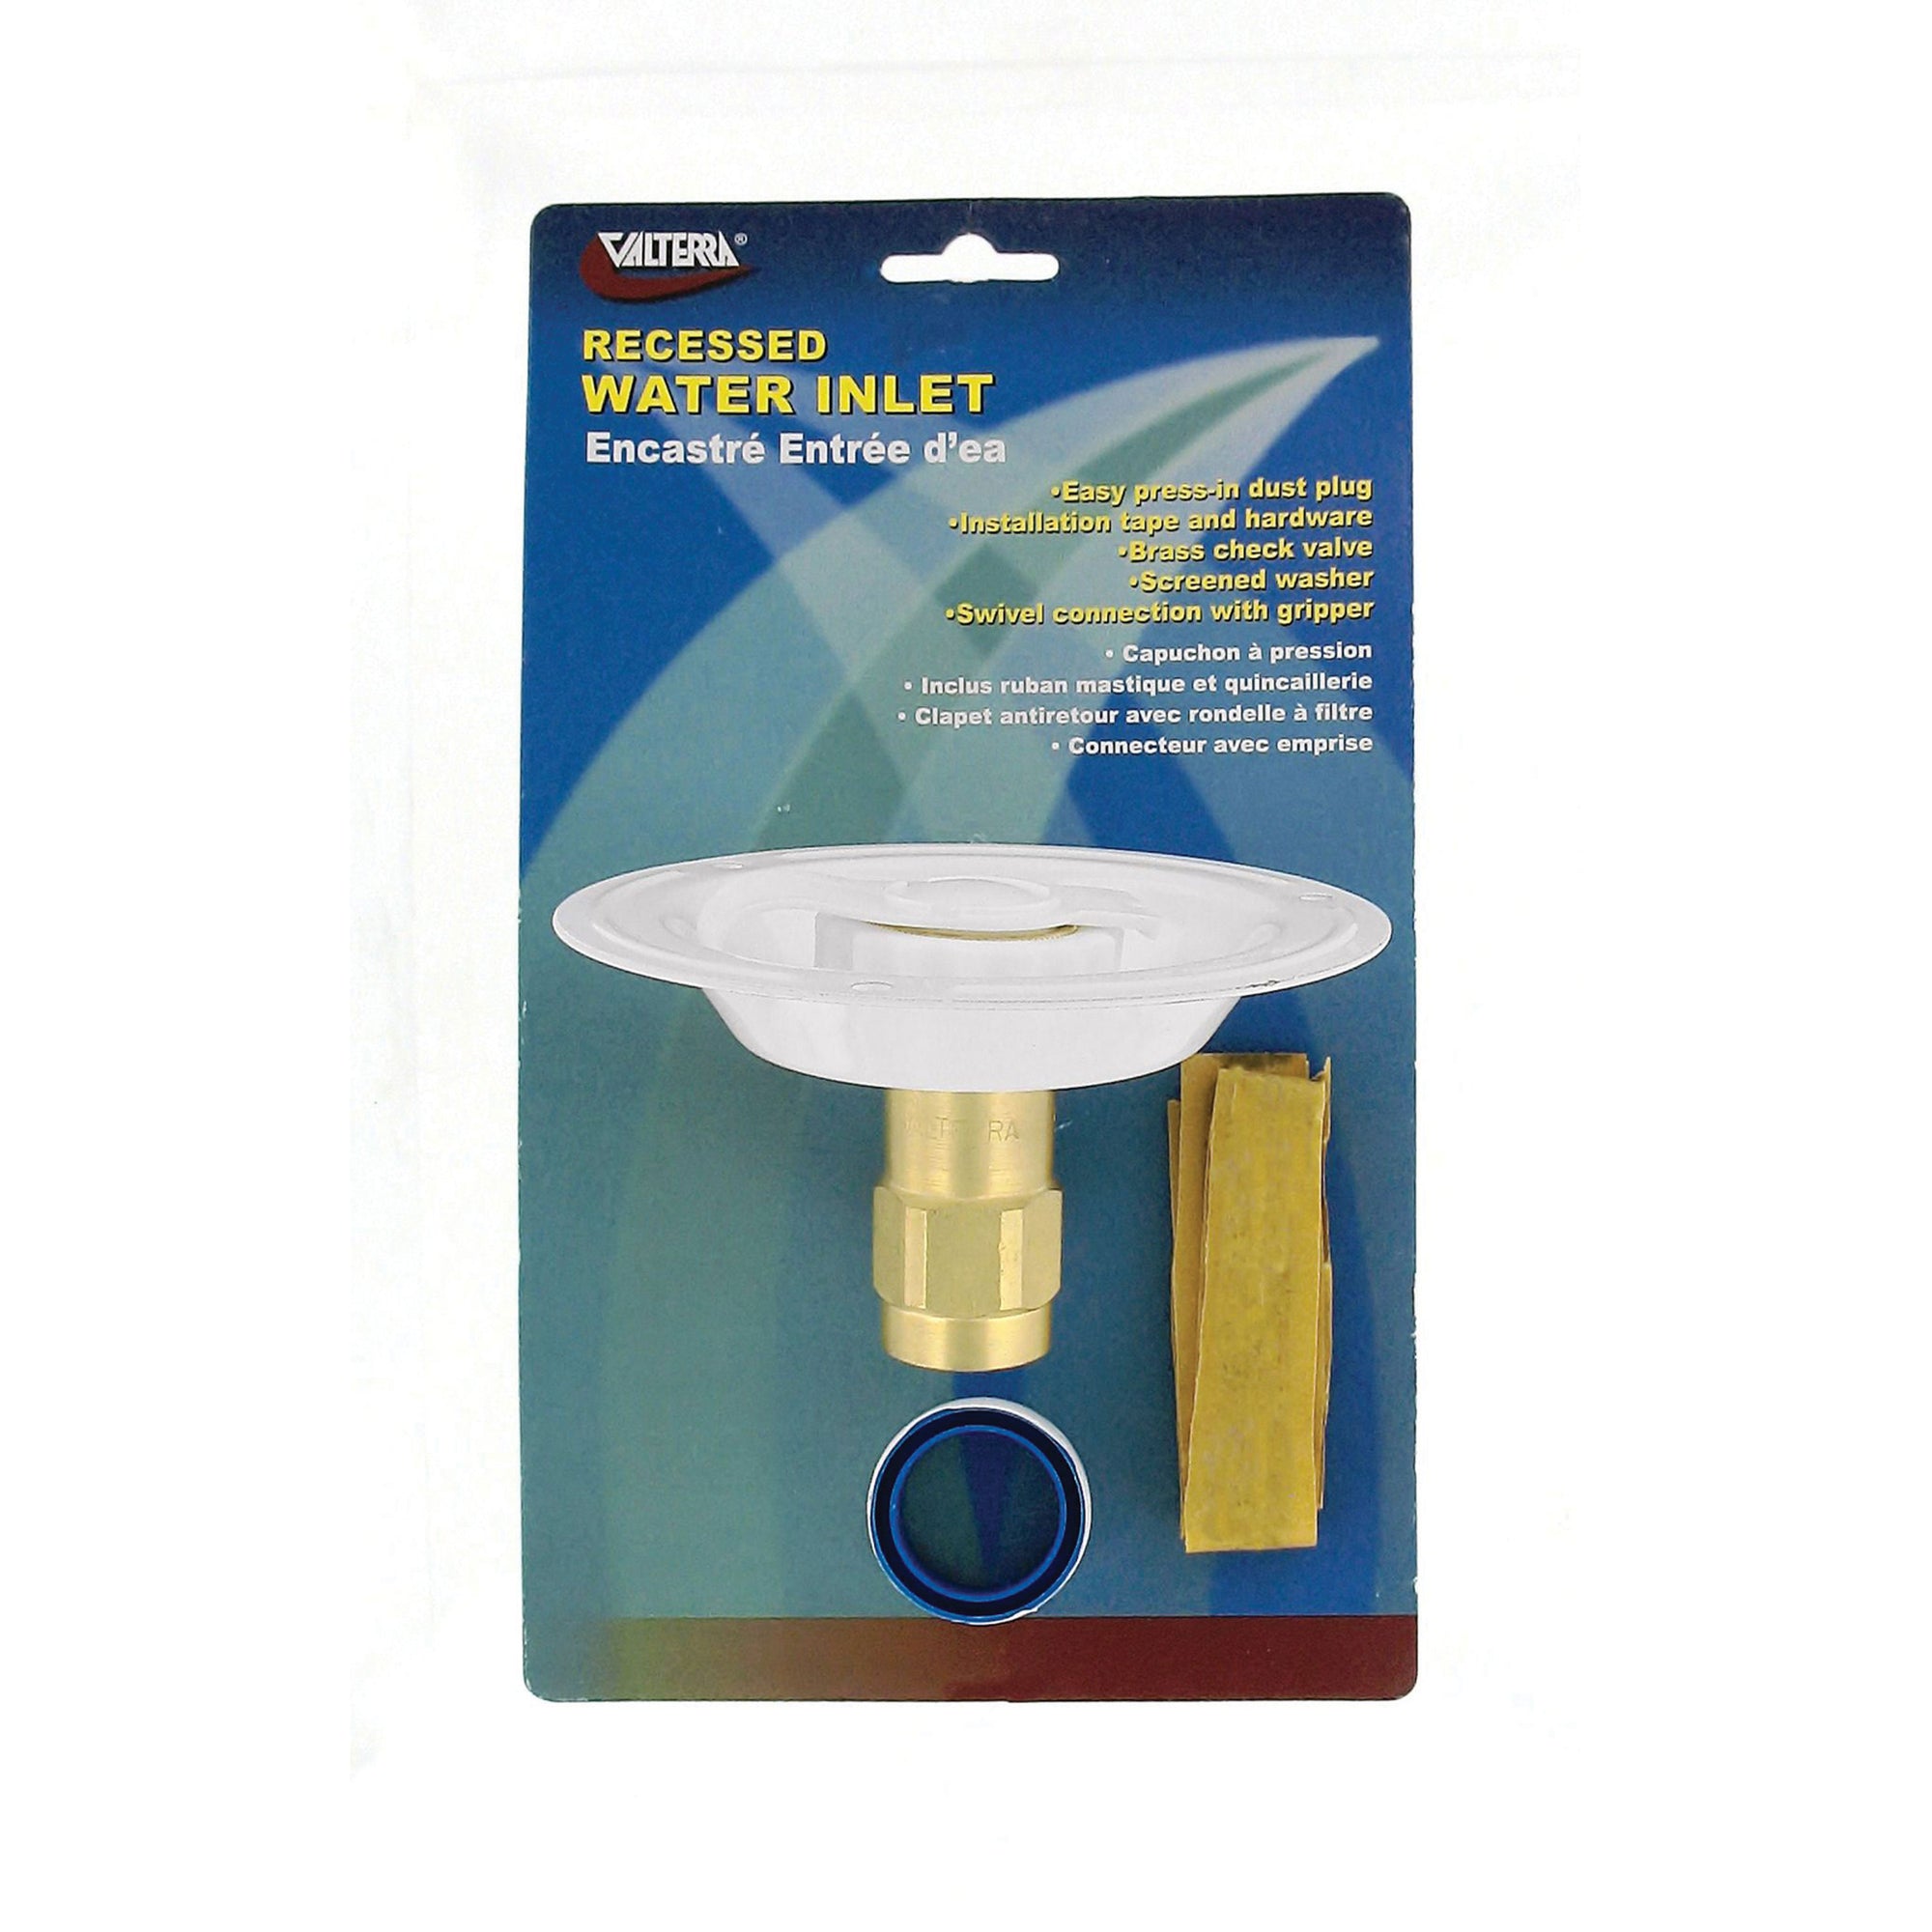 Valterra A01-0177LFVP Recessed Water Inlet - FPT, Colonial White (Carded)